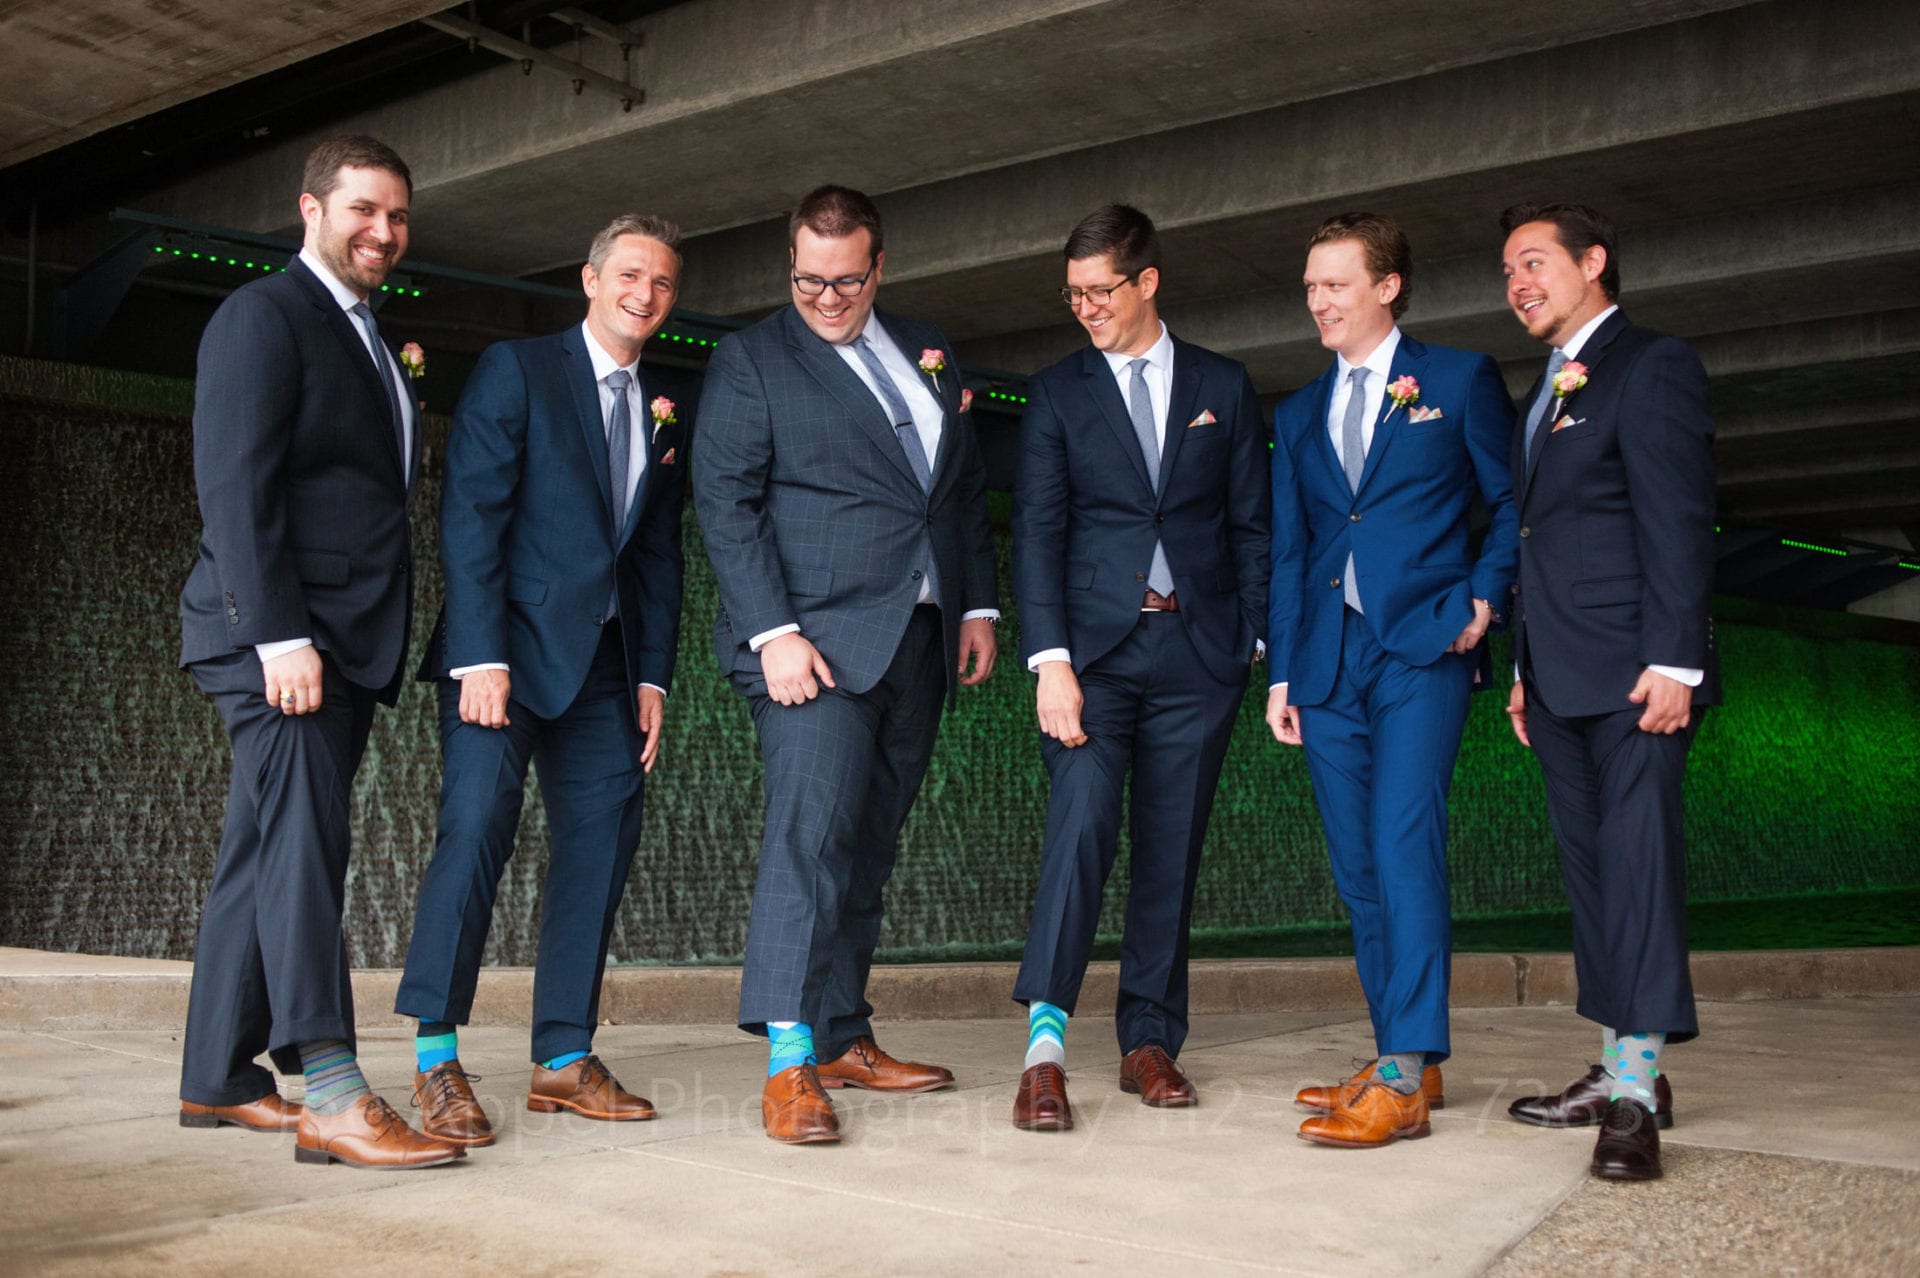 6 men wearing different styles of blue suits hike up their pants legs to show off their bright blue patterned socks.